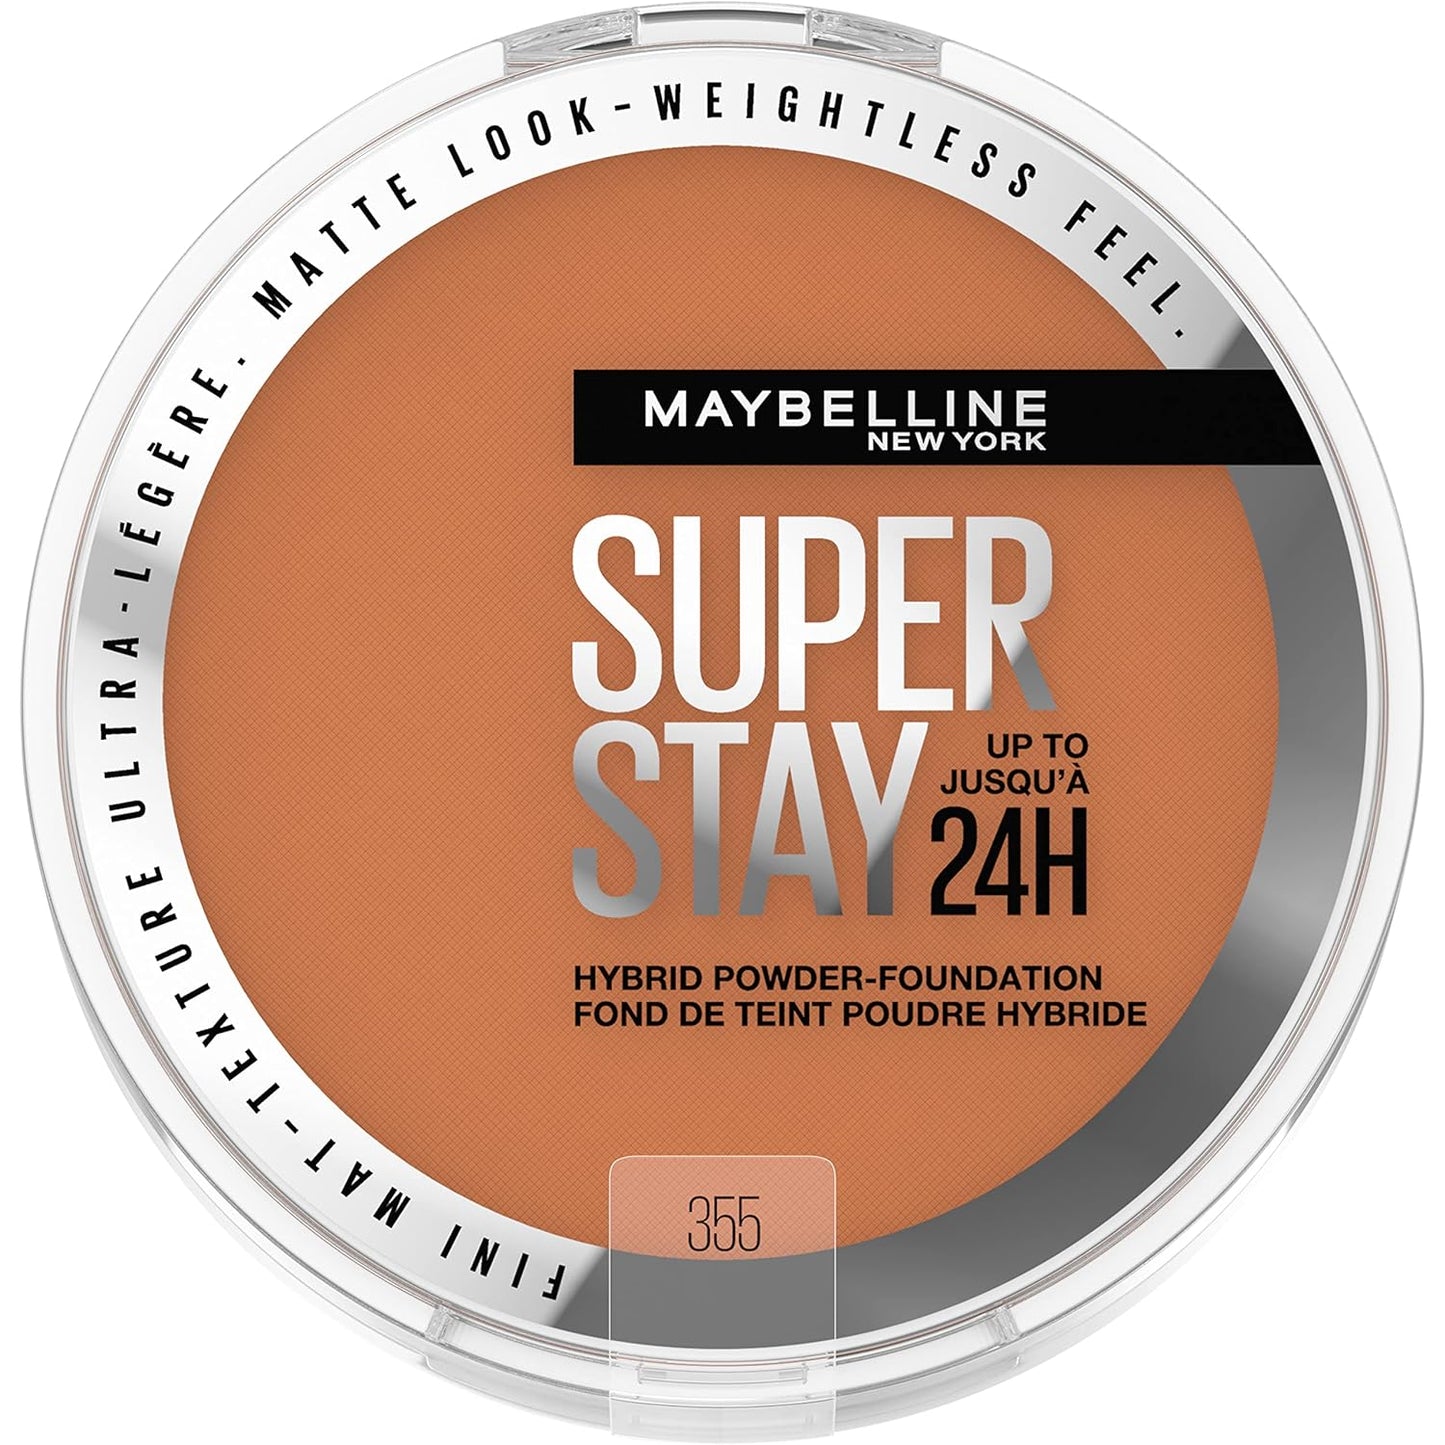 MAYBELLINE Fond de teint Poudre Superstay 24HR Full Coverage